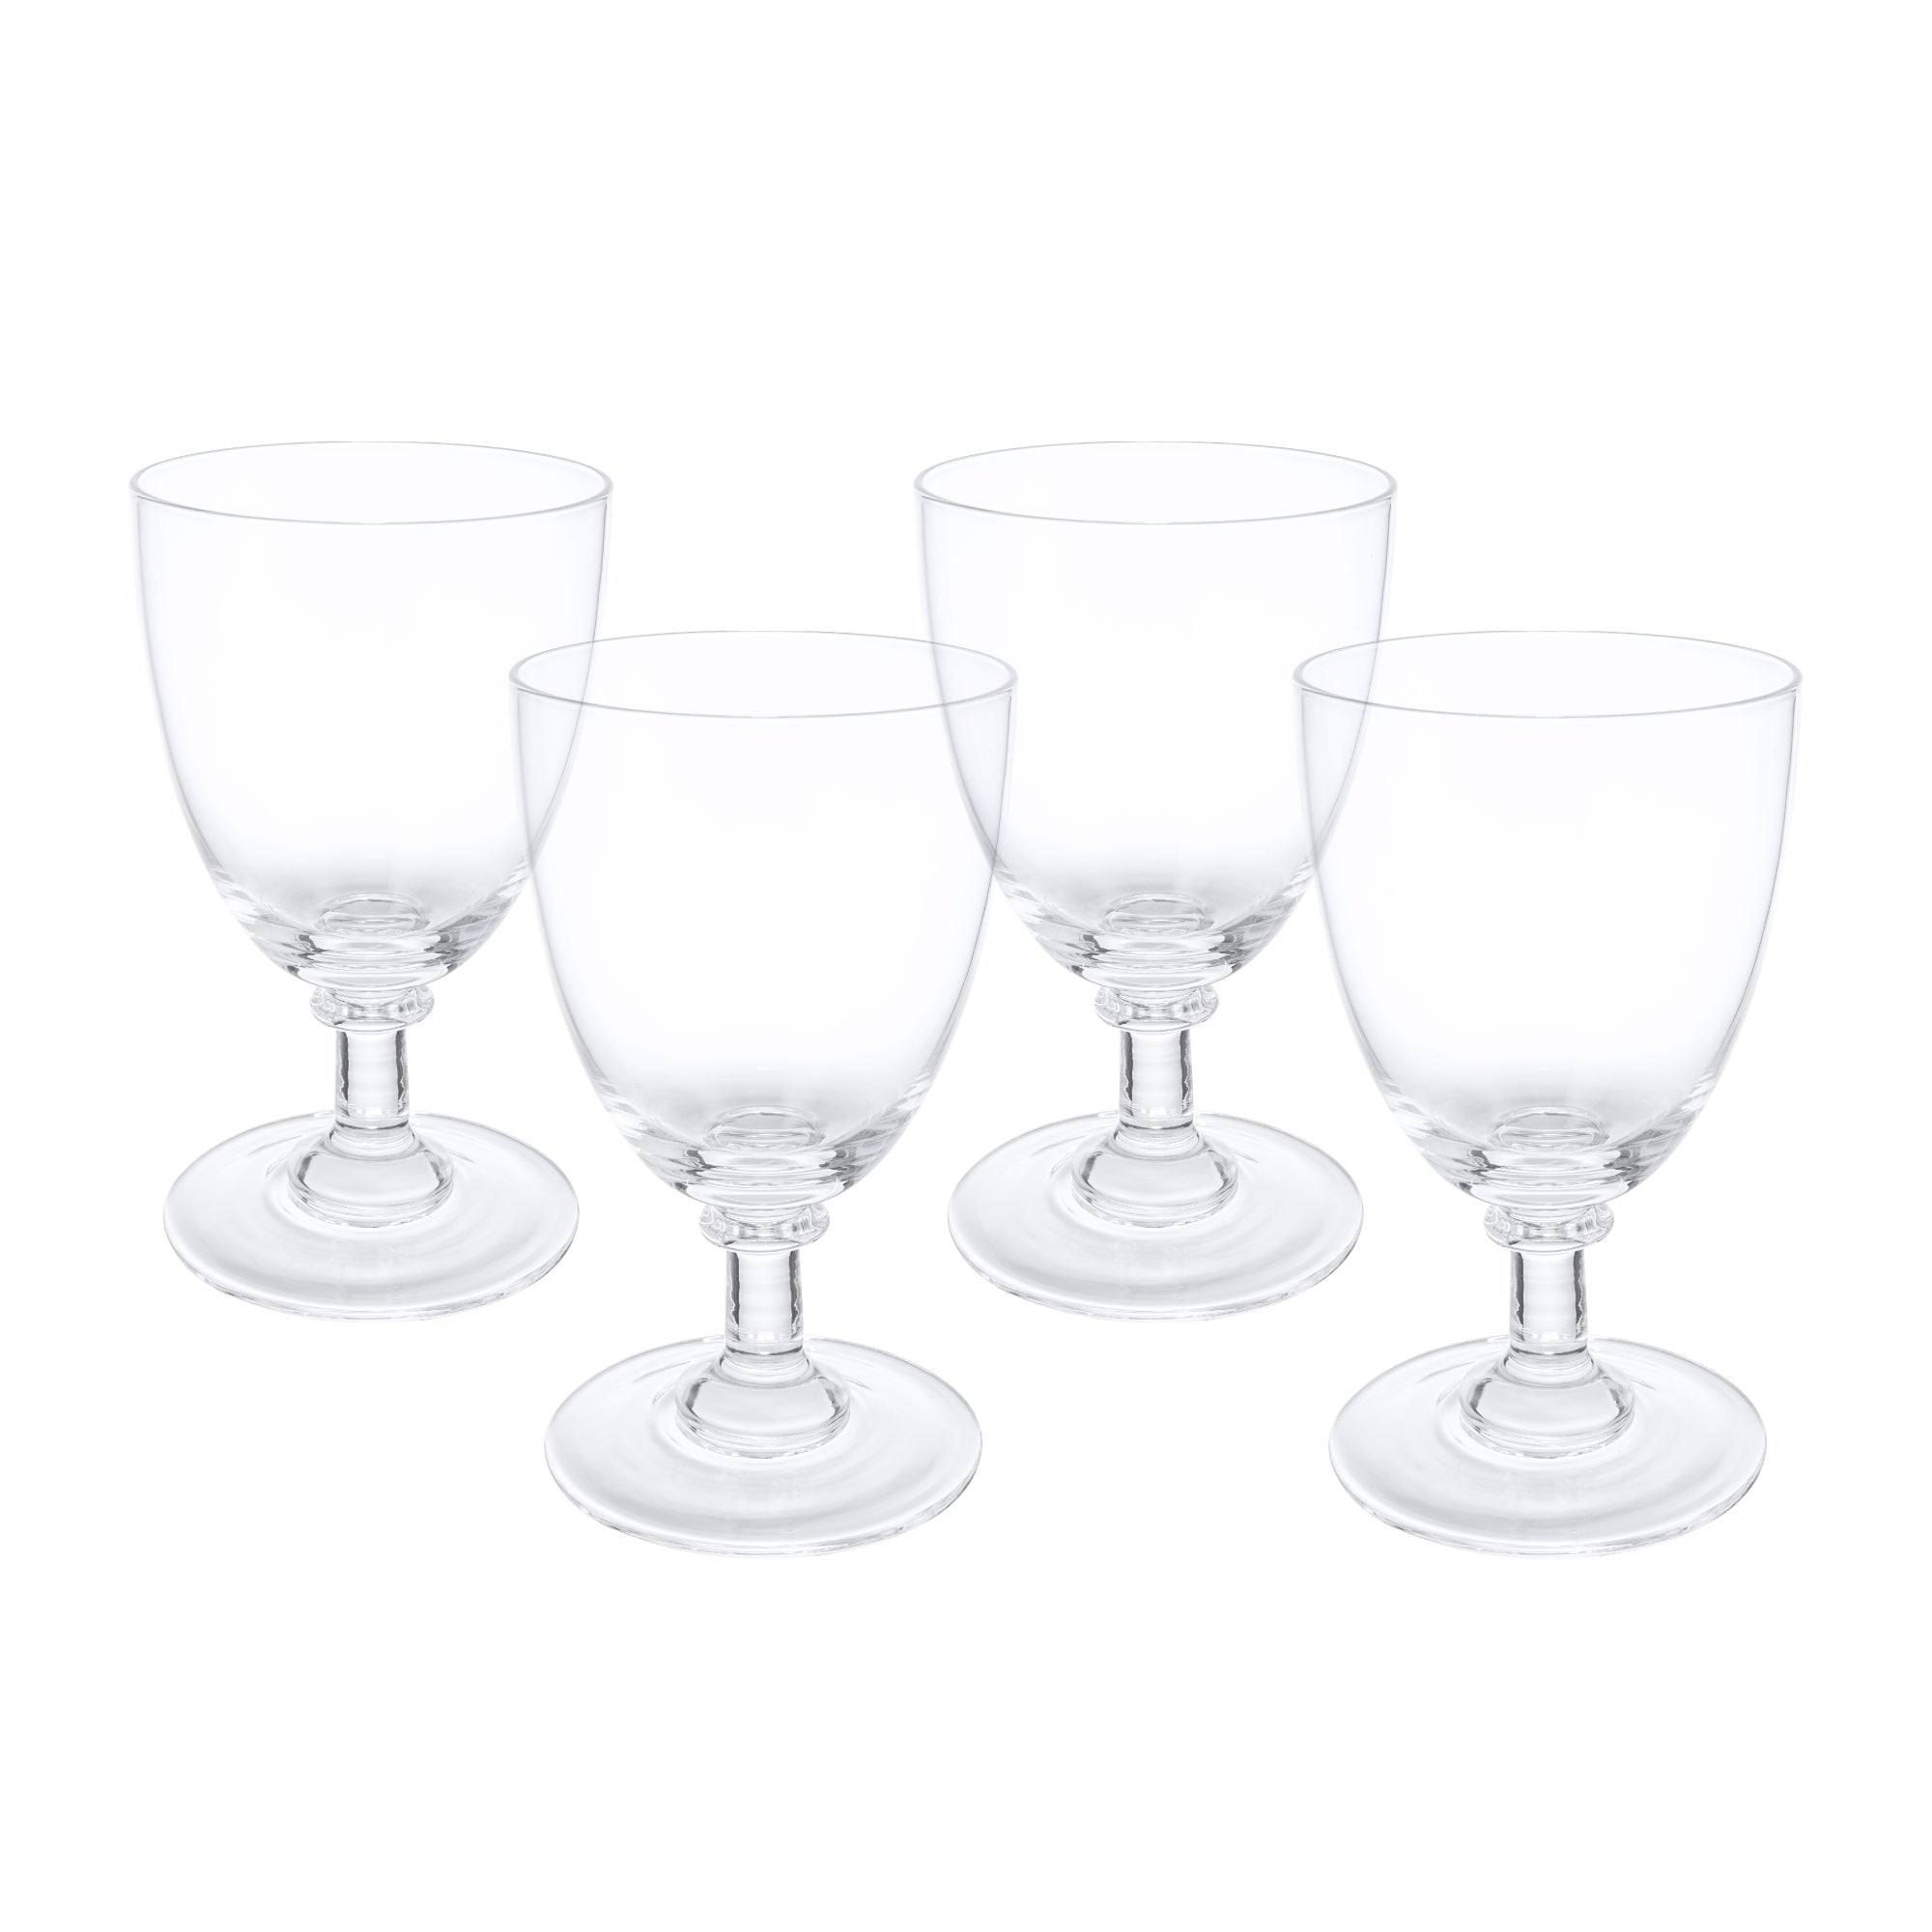 MARY BERRY SIGNATURE PACK OF FOUR WHITE WINE GLASS